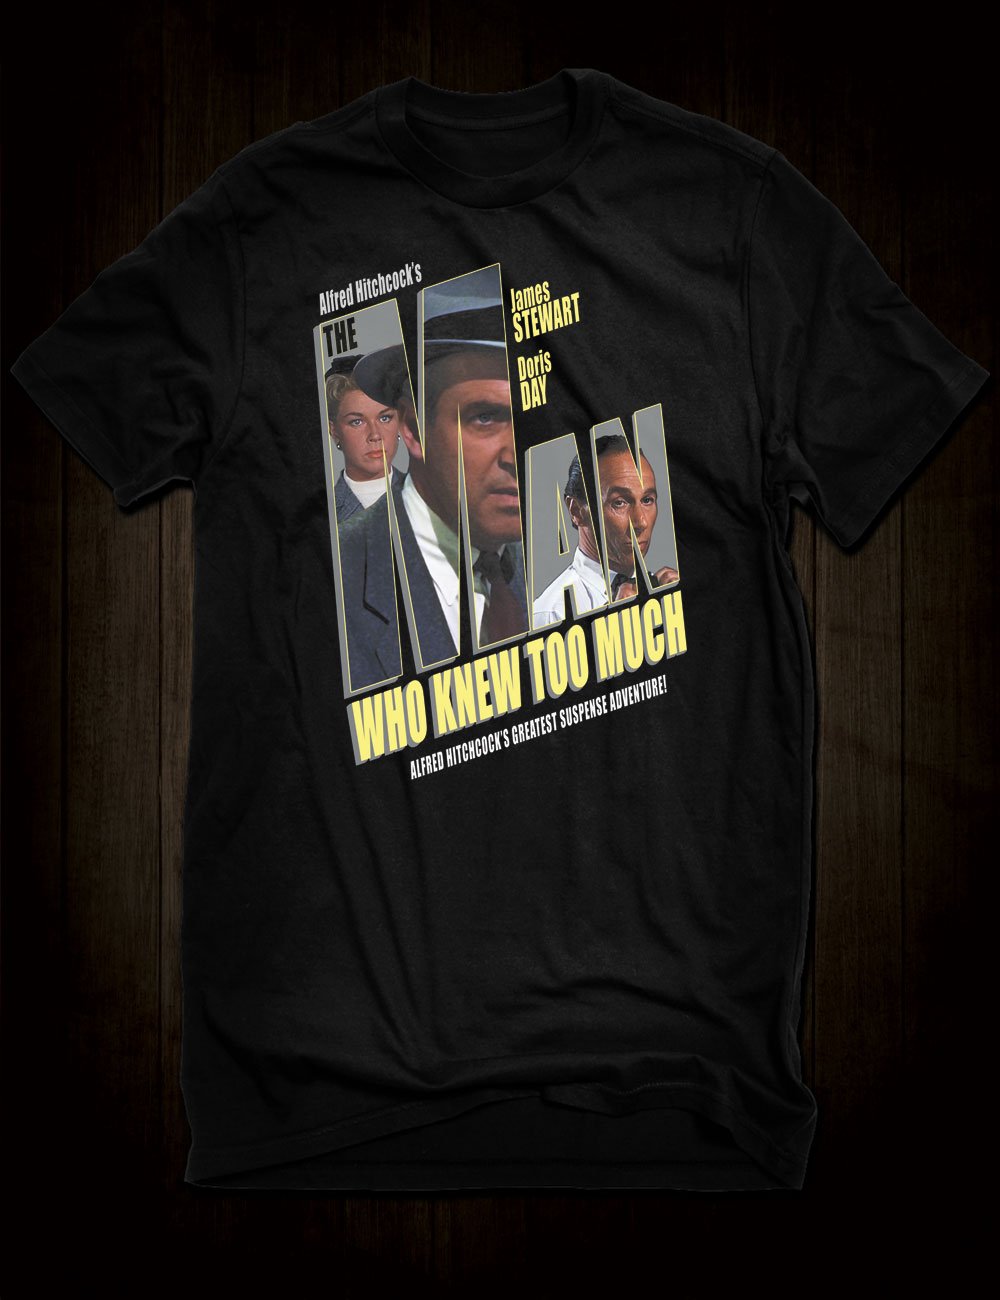 The Man Who Knew Too Much T-Shirt